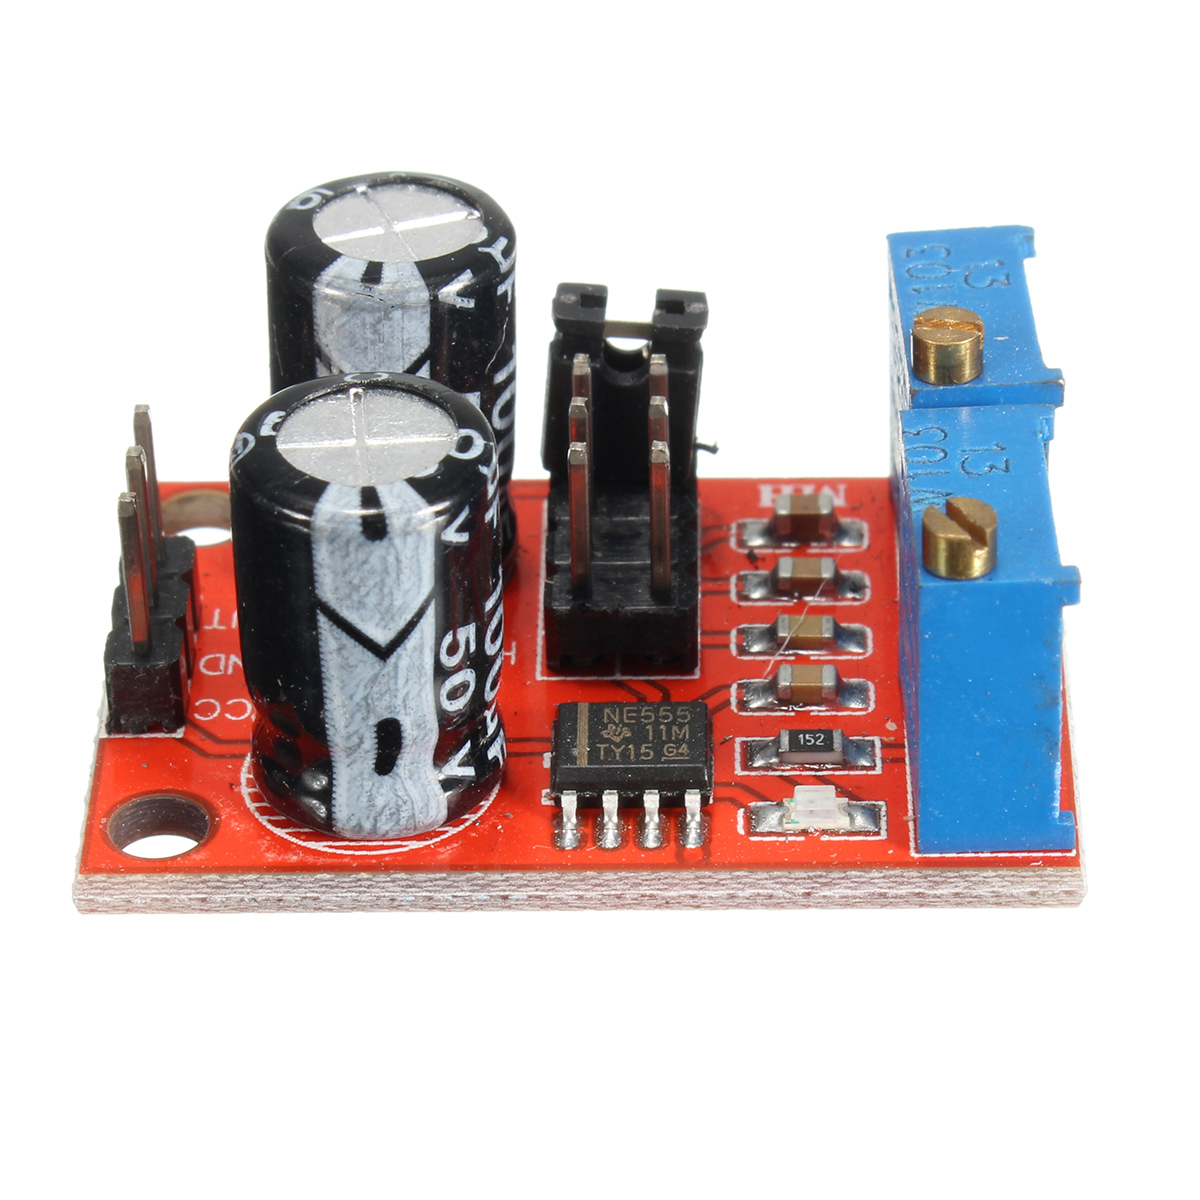 NE555-Pulse-Frequency-Duty-Cycle-Adjustable-Module-Square-Wave-Signal-Generator-Stepper-Motor-Driver-1163653